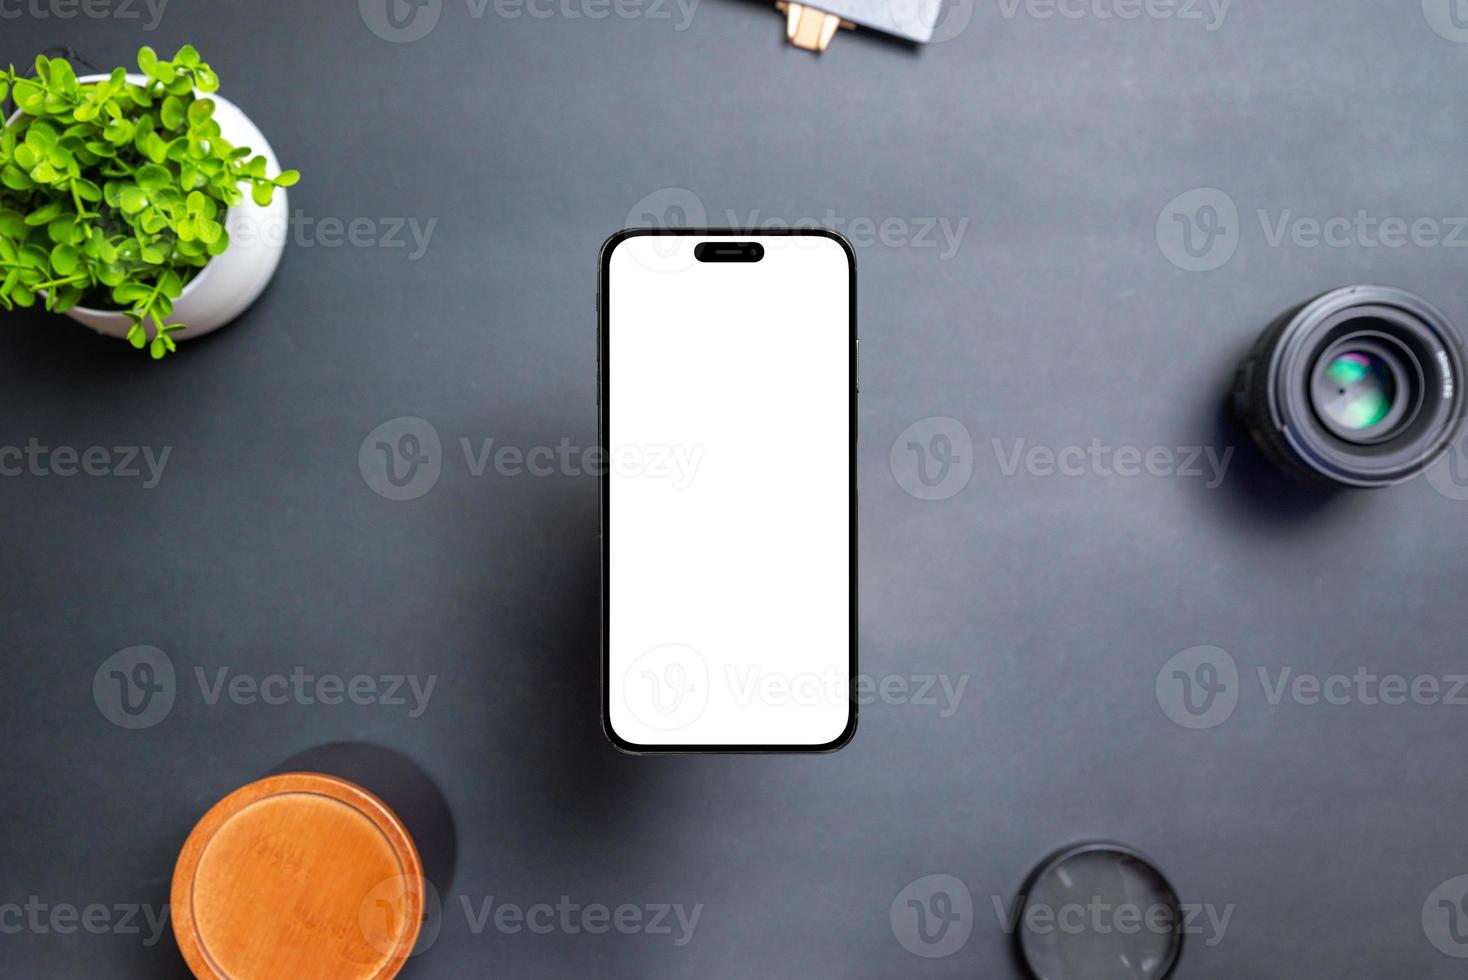 Phone with isolated display floats above the desk. The front camera is built into the display. Modern round and thin edges. Black table with plant, lens and box. Top view, flat lay photo